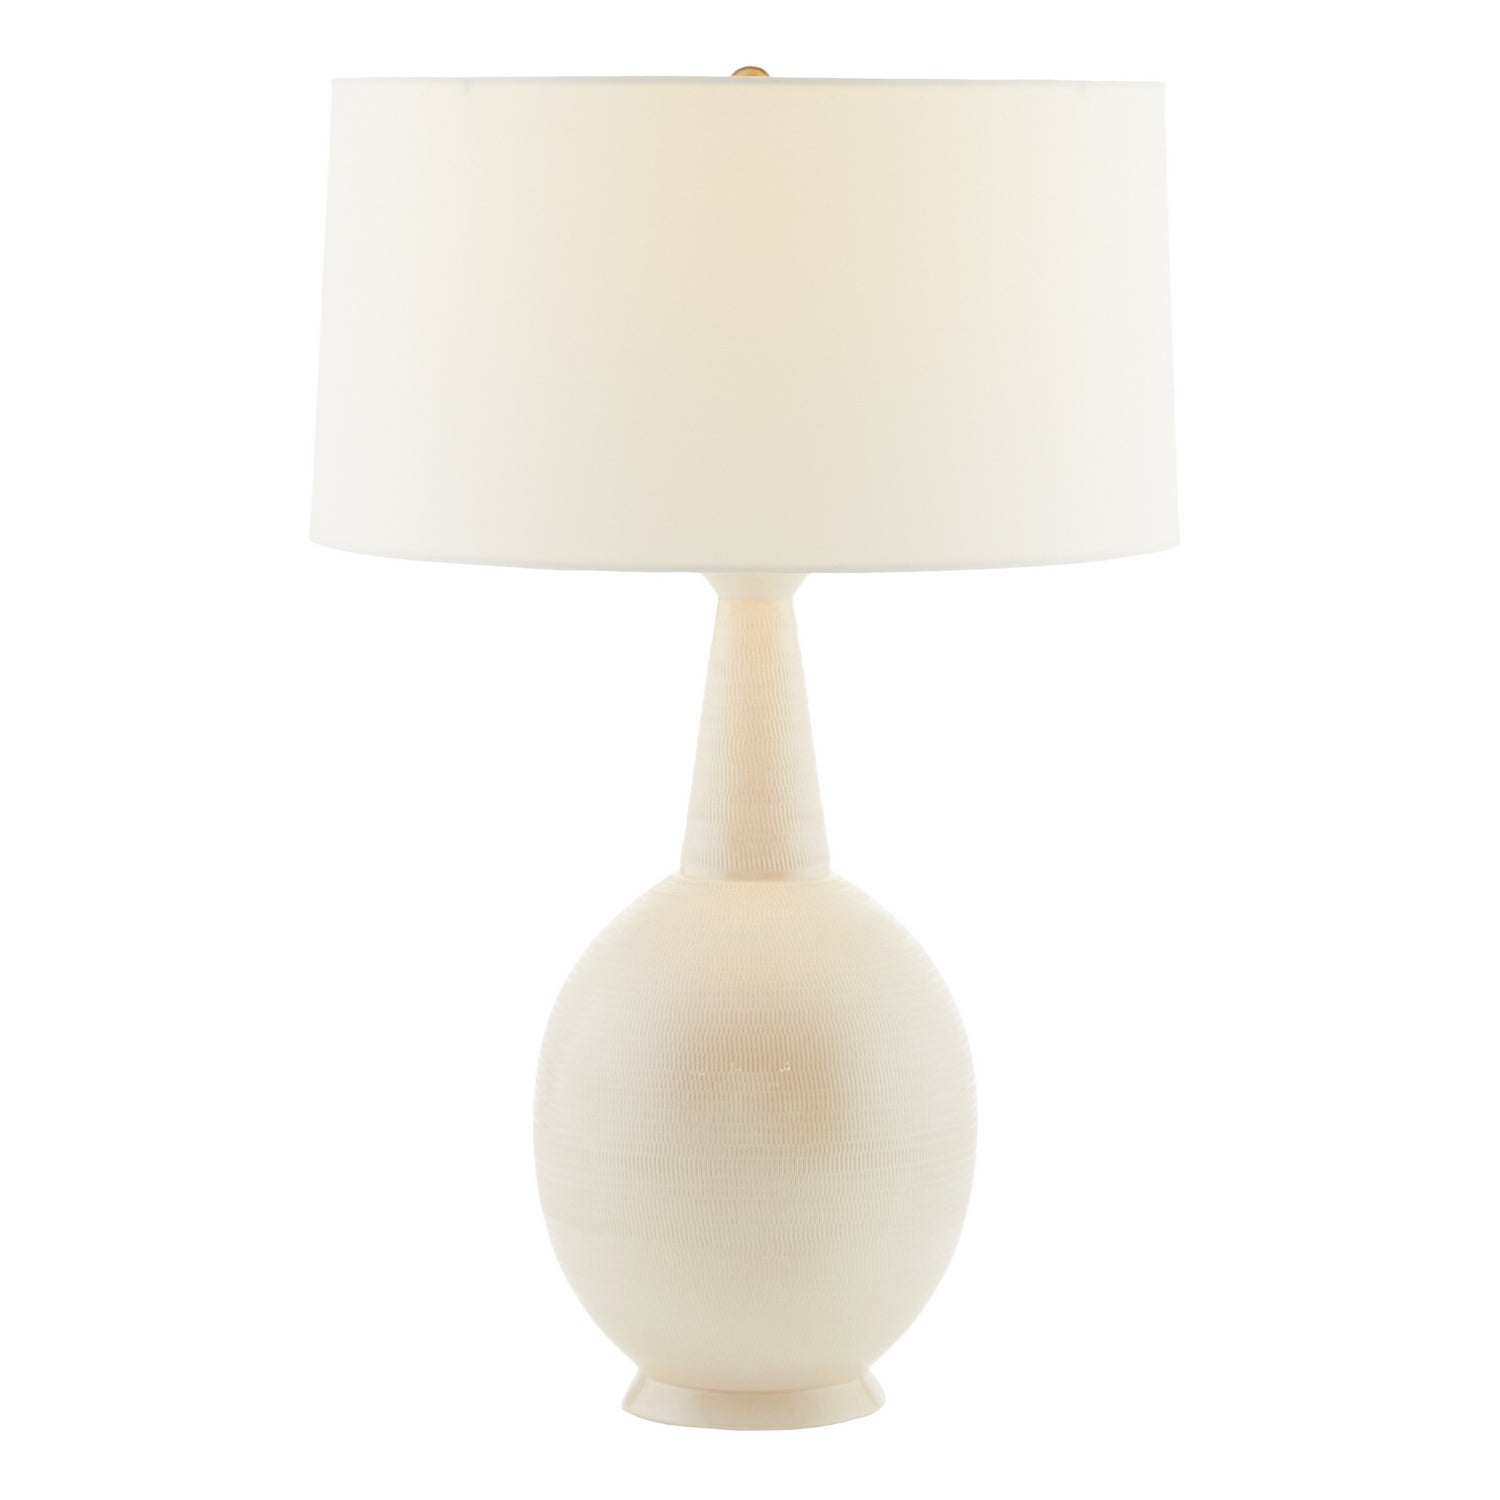 One Light Table Lamp from the Padget collection in Oat finish